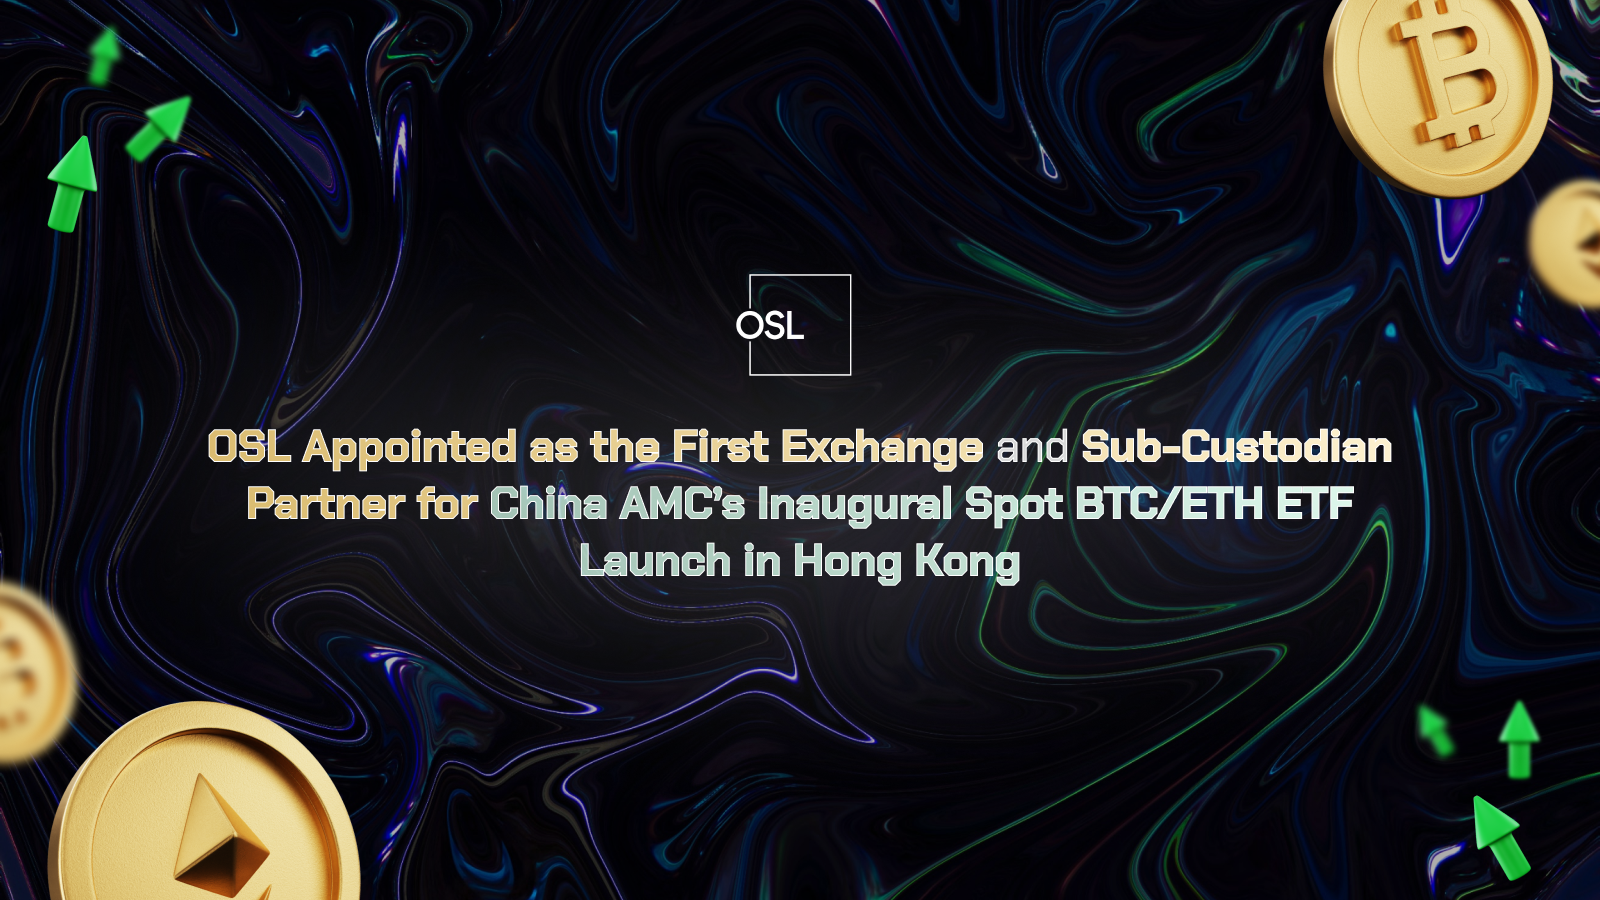 OSL Appointed as the First Exchange and Sub-Custodian Partner  for China AMC’s Inaugural Spot BTC/ETH ETF Launch in Hong Kong